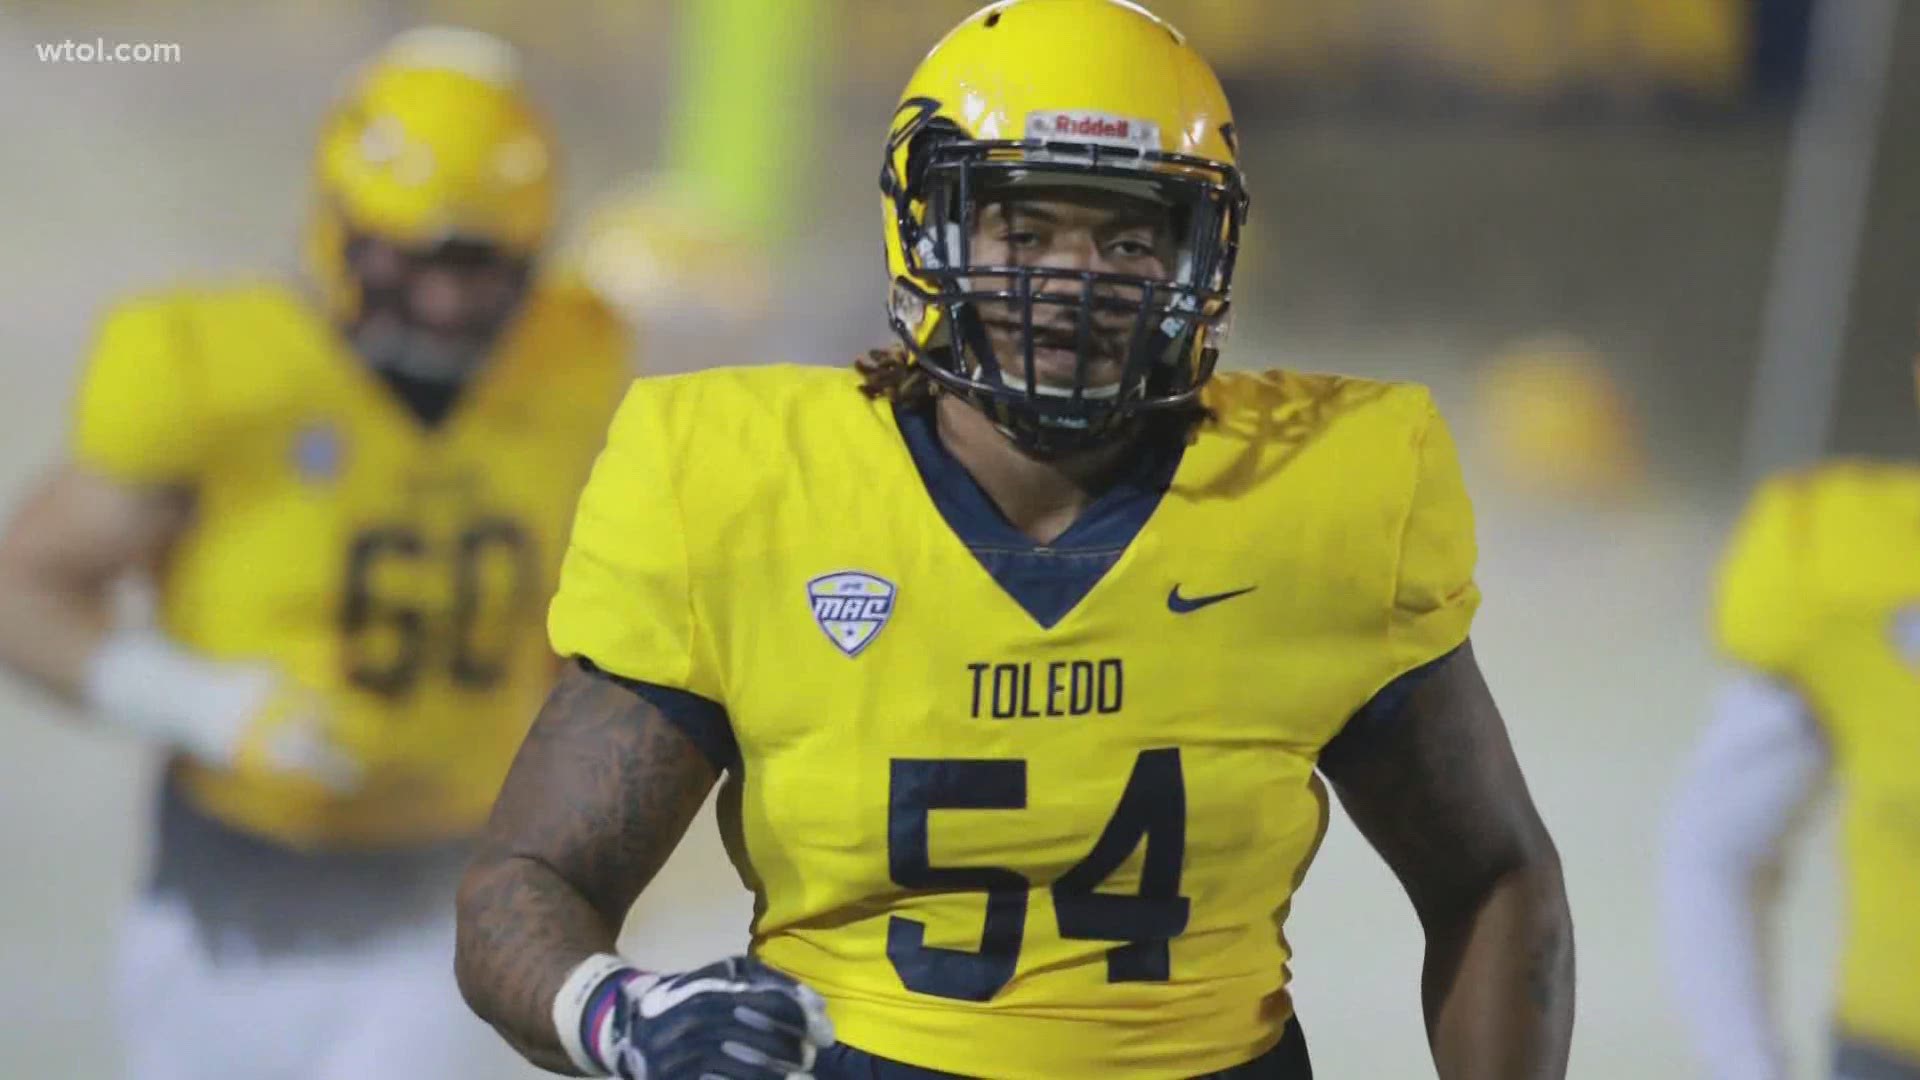 A 24-year-old man was charged Wednesday with the murder of Jahneil Douglas. In the meantime, the Toledo Rockets are mourning the loss of a team player.